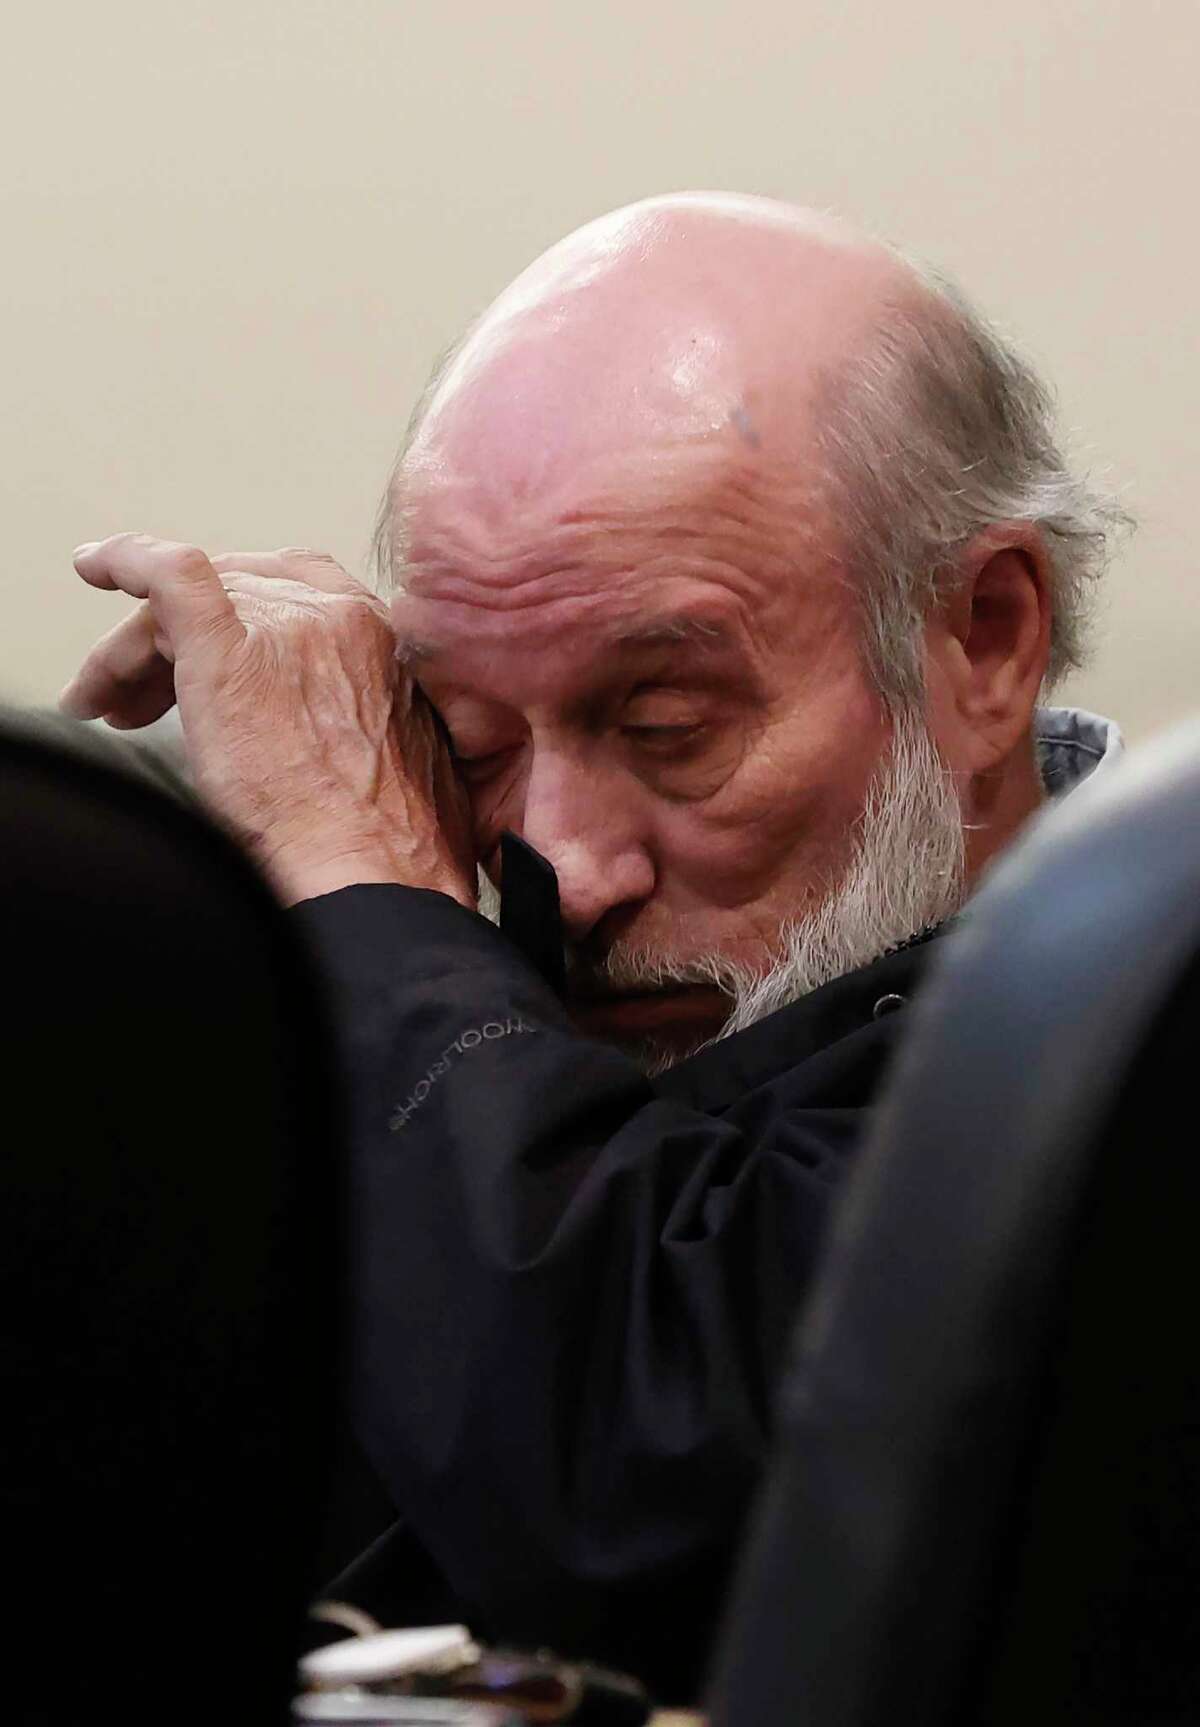 Larry Leroy Moore clears his eye as testimony continues on the third day of his capital murder trial in the 175th District Court on Thursday. Moore is accused of raping and killing Dianna Lowery, 25, in San Antonio on Jan. 29, 1987.